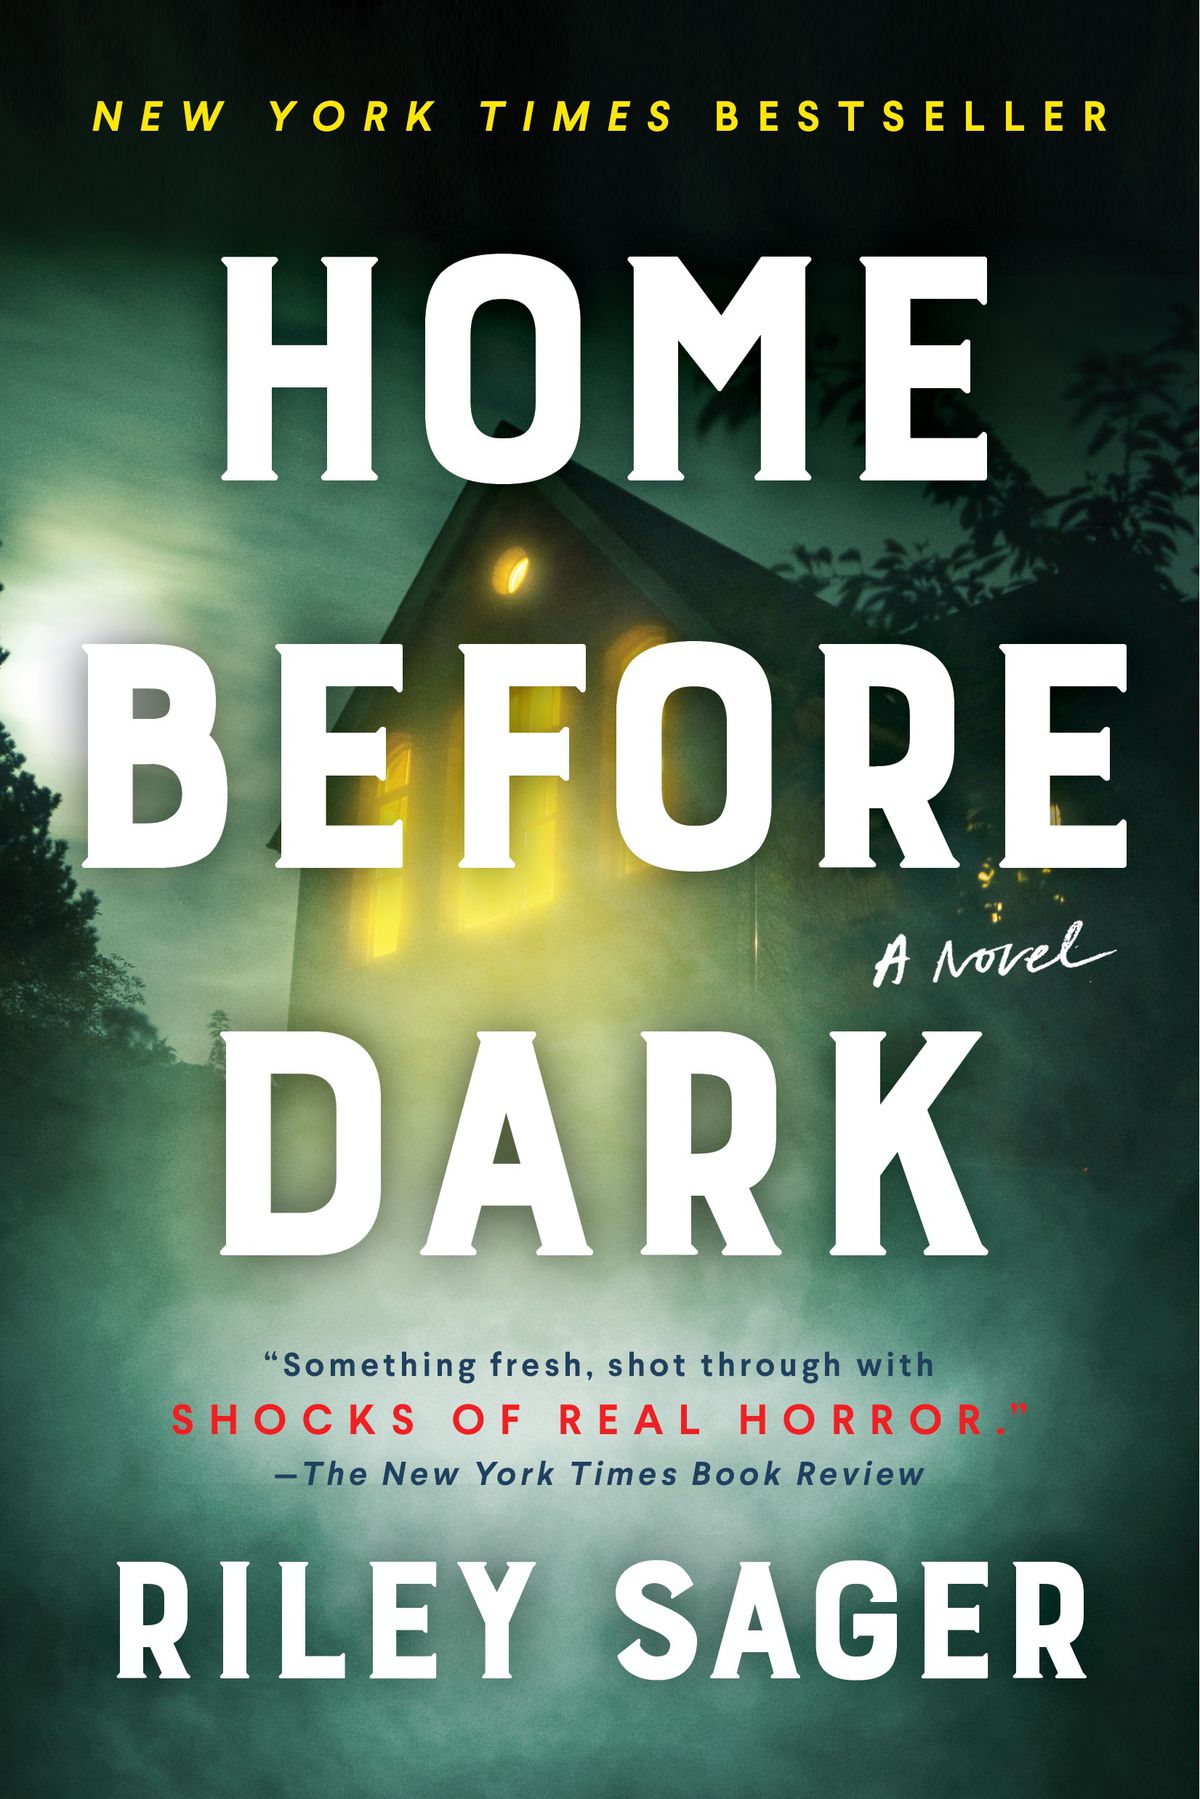 Cover image for Riley Sager’s Home Before Dark, which shows a house with the lights on obscured by fog.